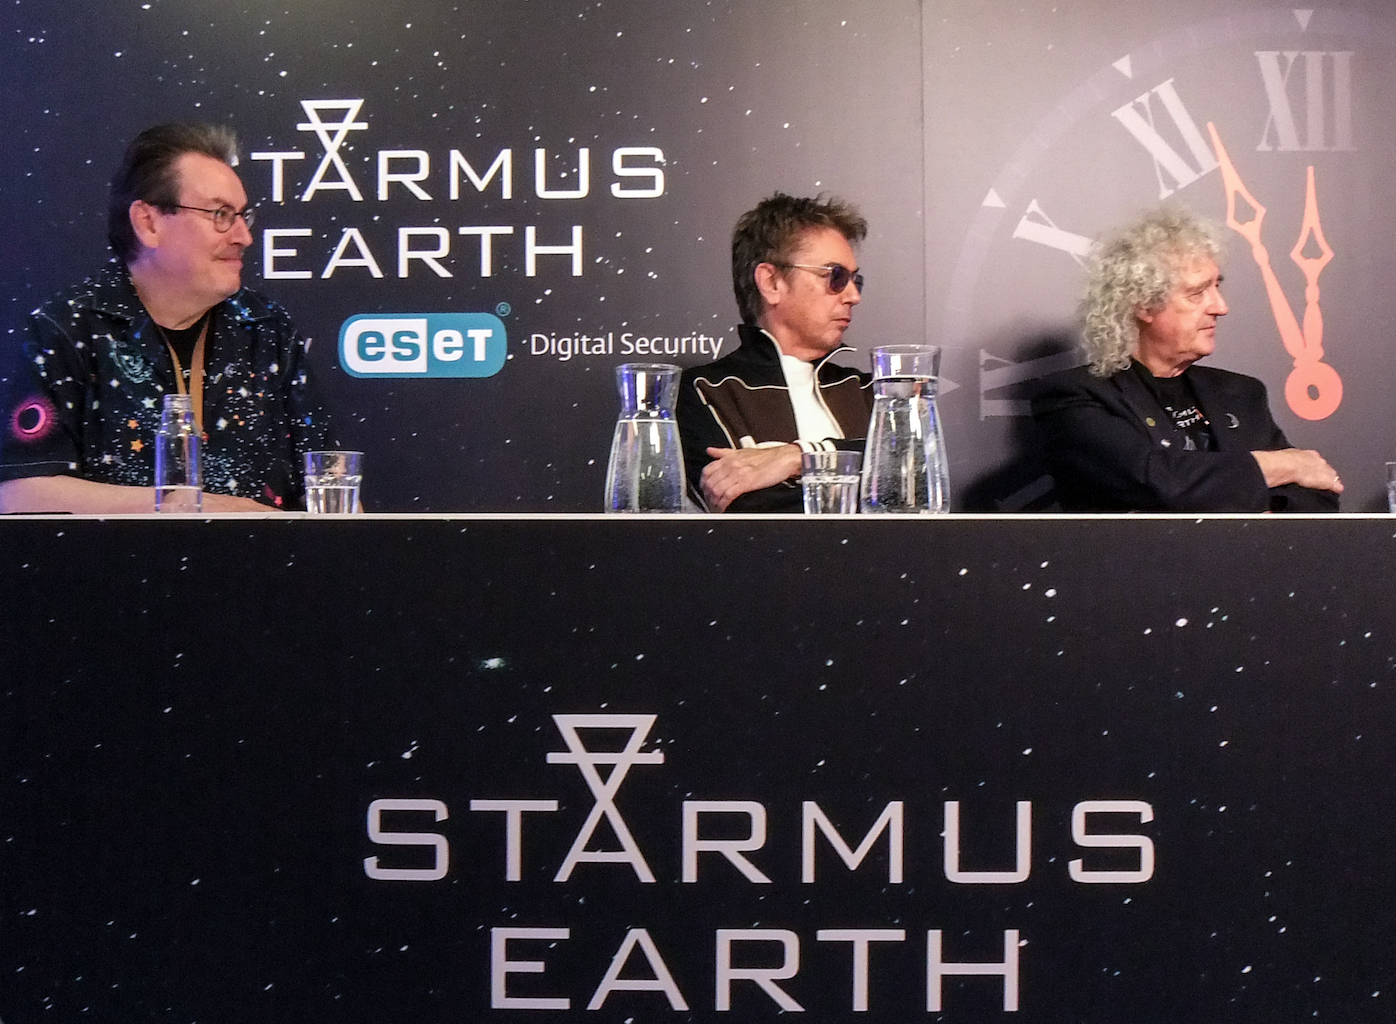 A press conference describing the wide range of Starmus events featured board members including Dave Eicher, Jean-Michel Jarre, and Brian May. Credit: Maria Friargiu.